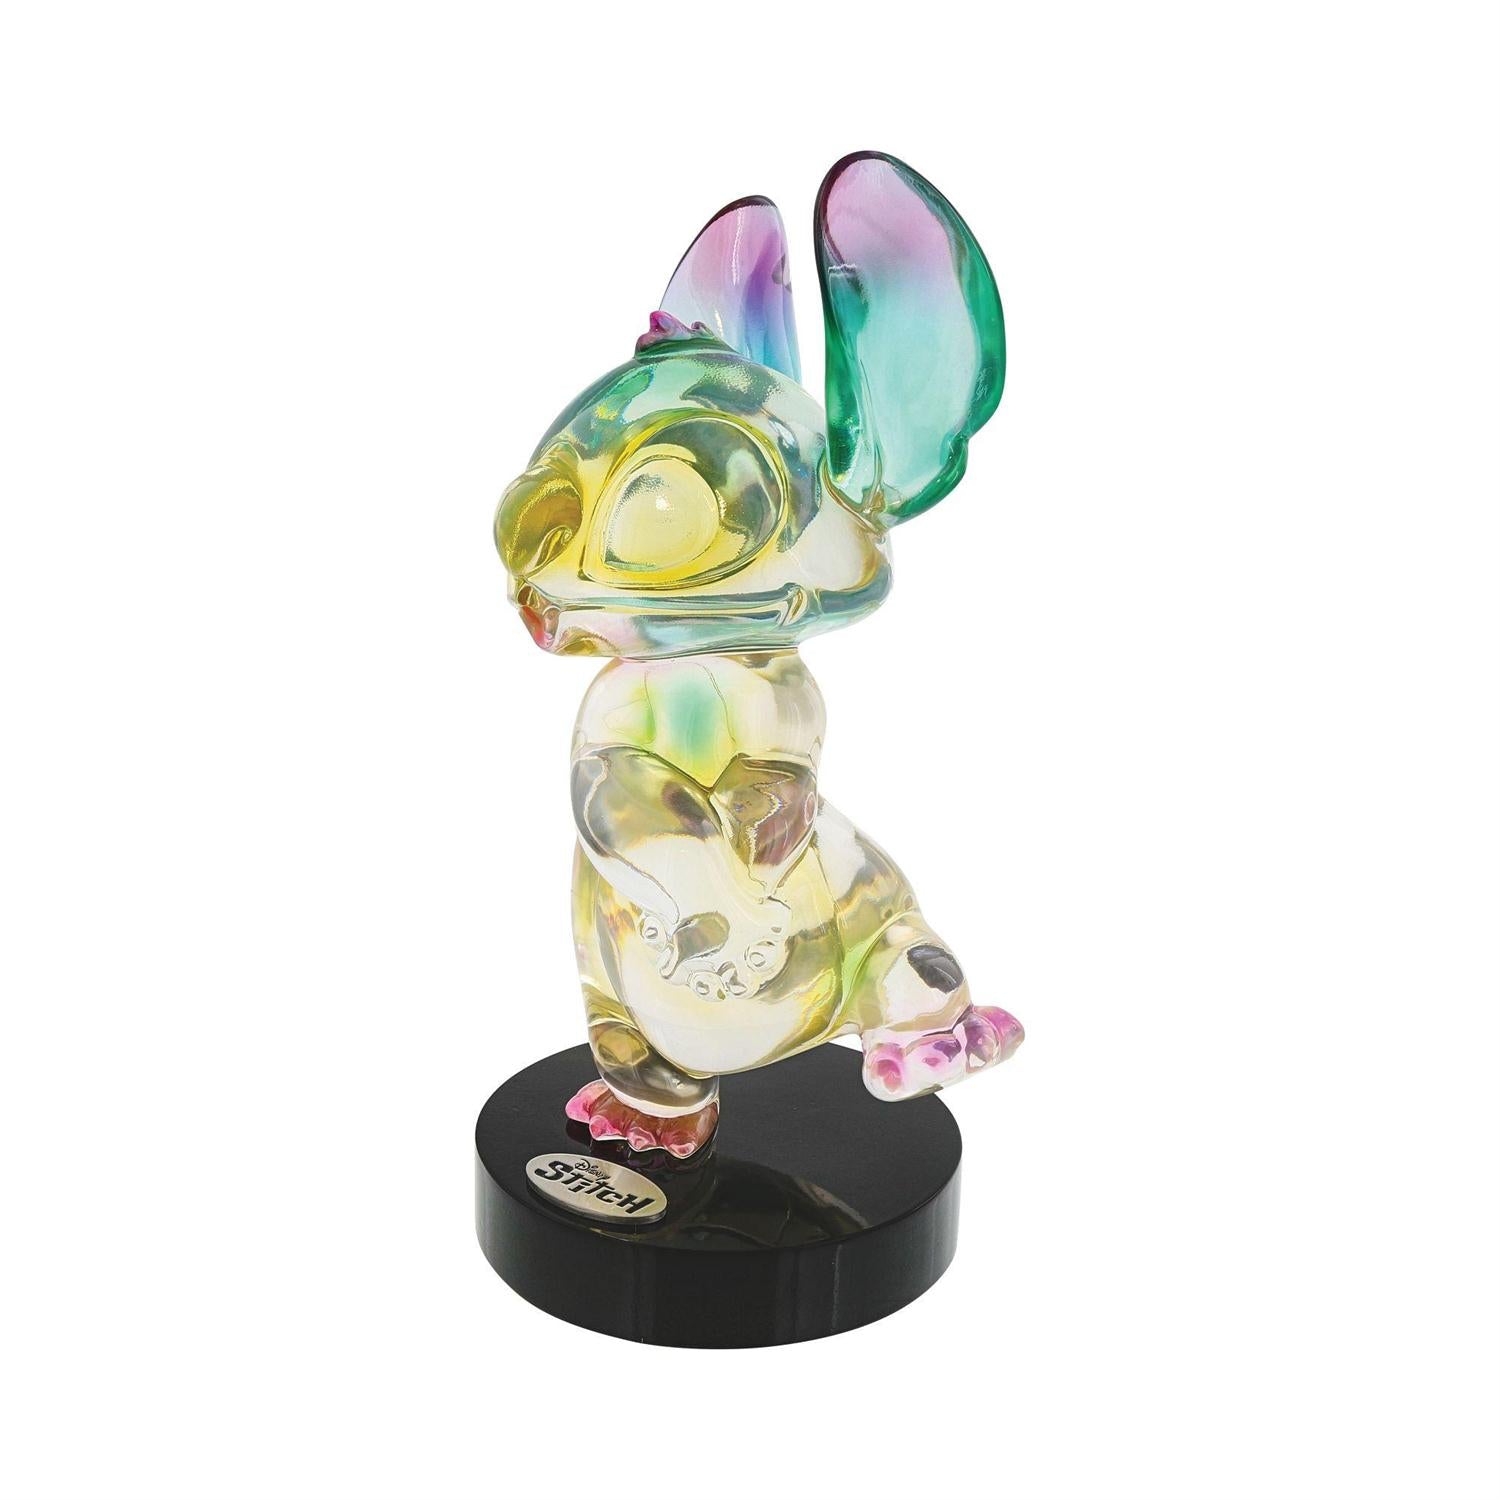 Stitch- clear resin with a rainbow color tint - side